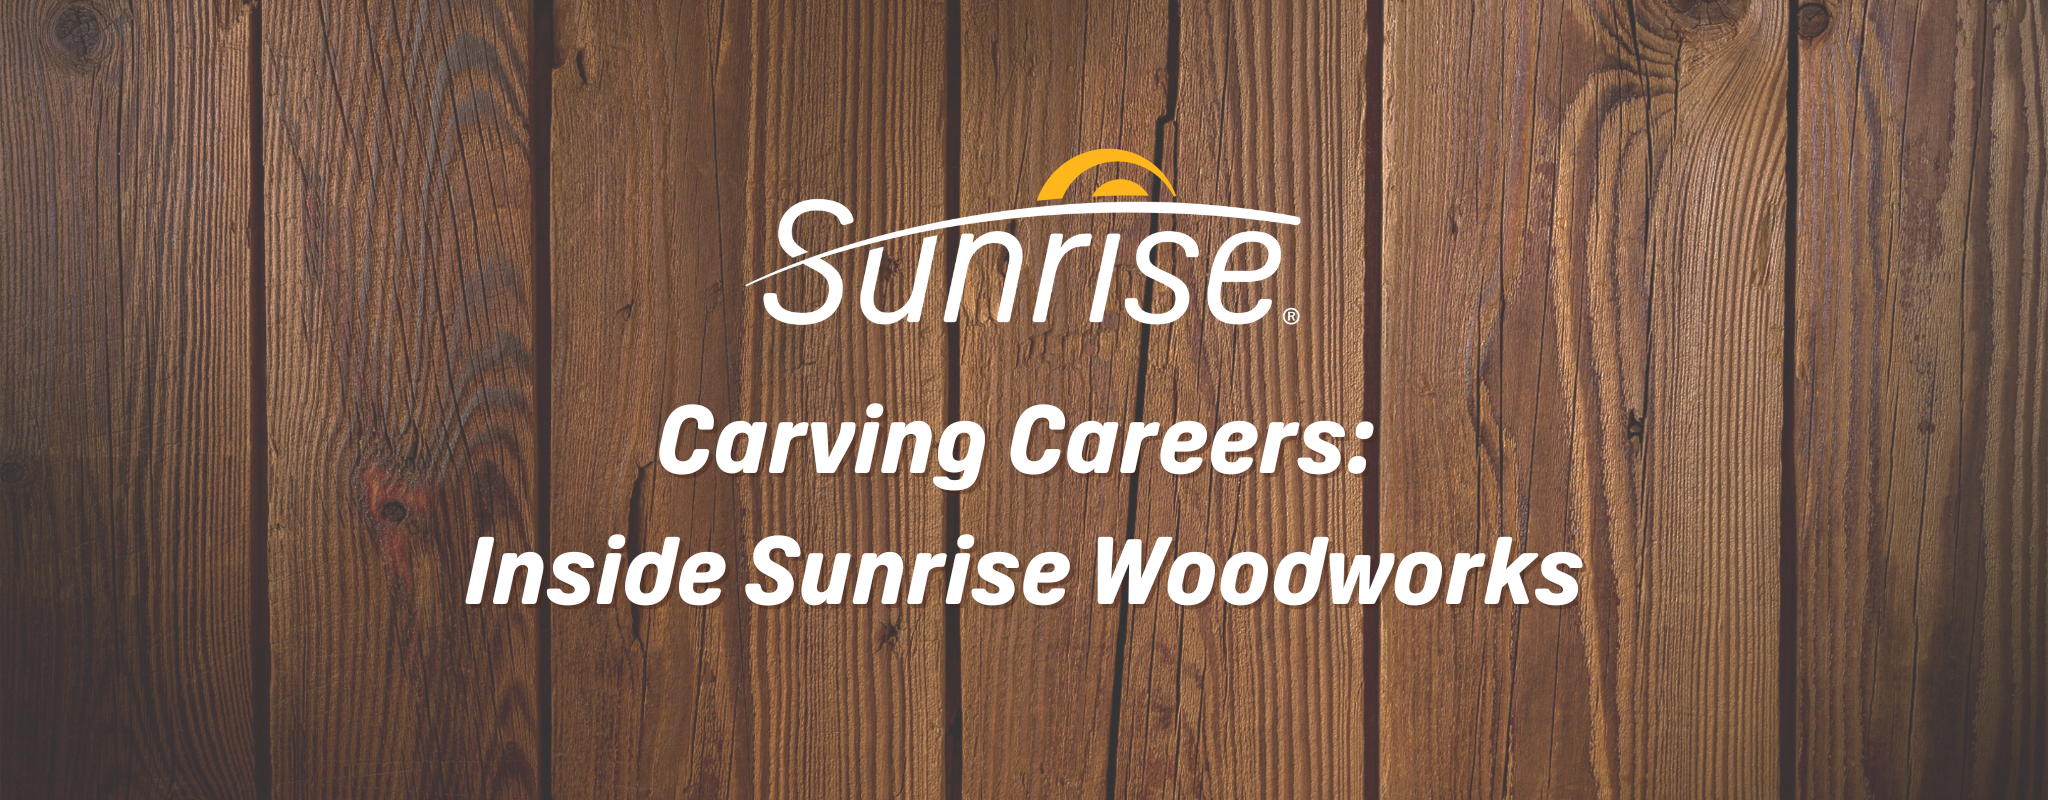 Banner image with a wood background. The Sunrise logo and title "Carving Careers: Inside Sunrise Woodworks" is in white on the background.